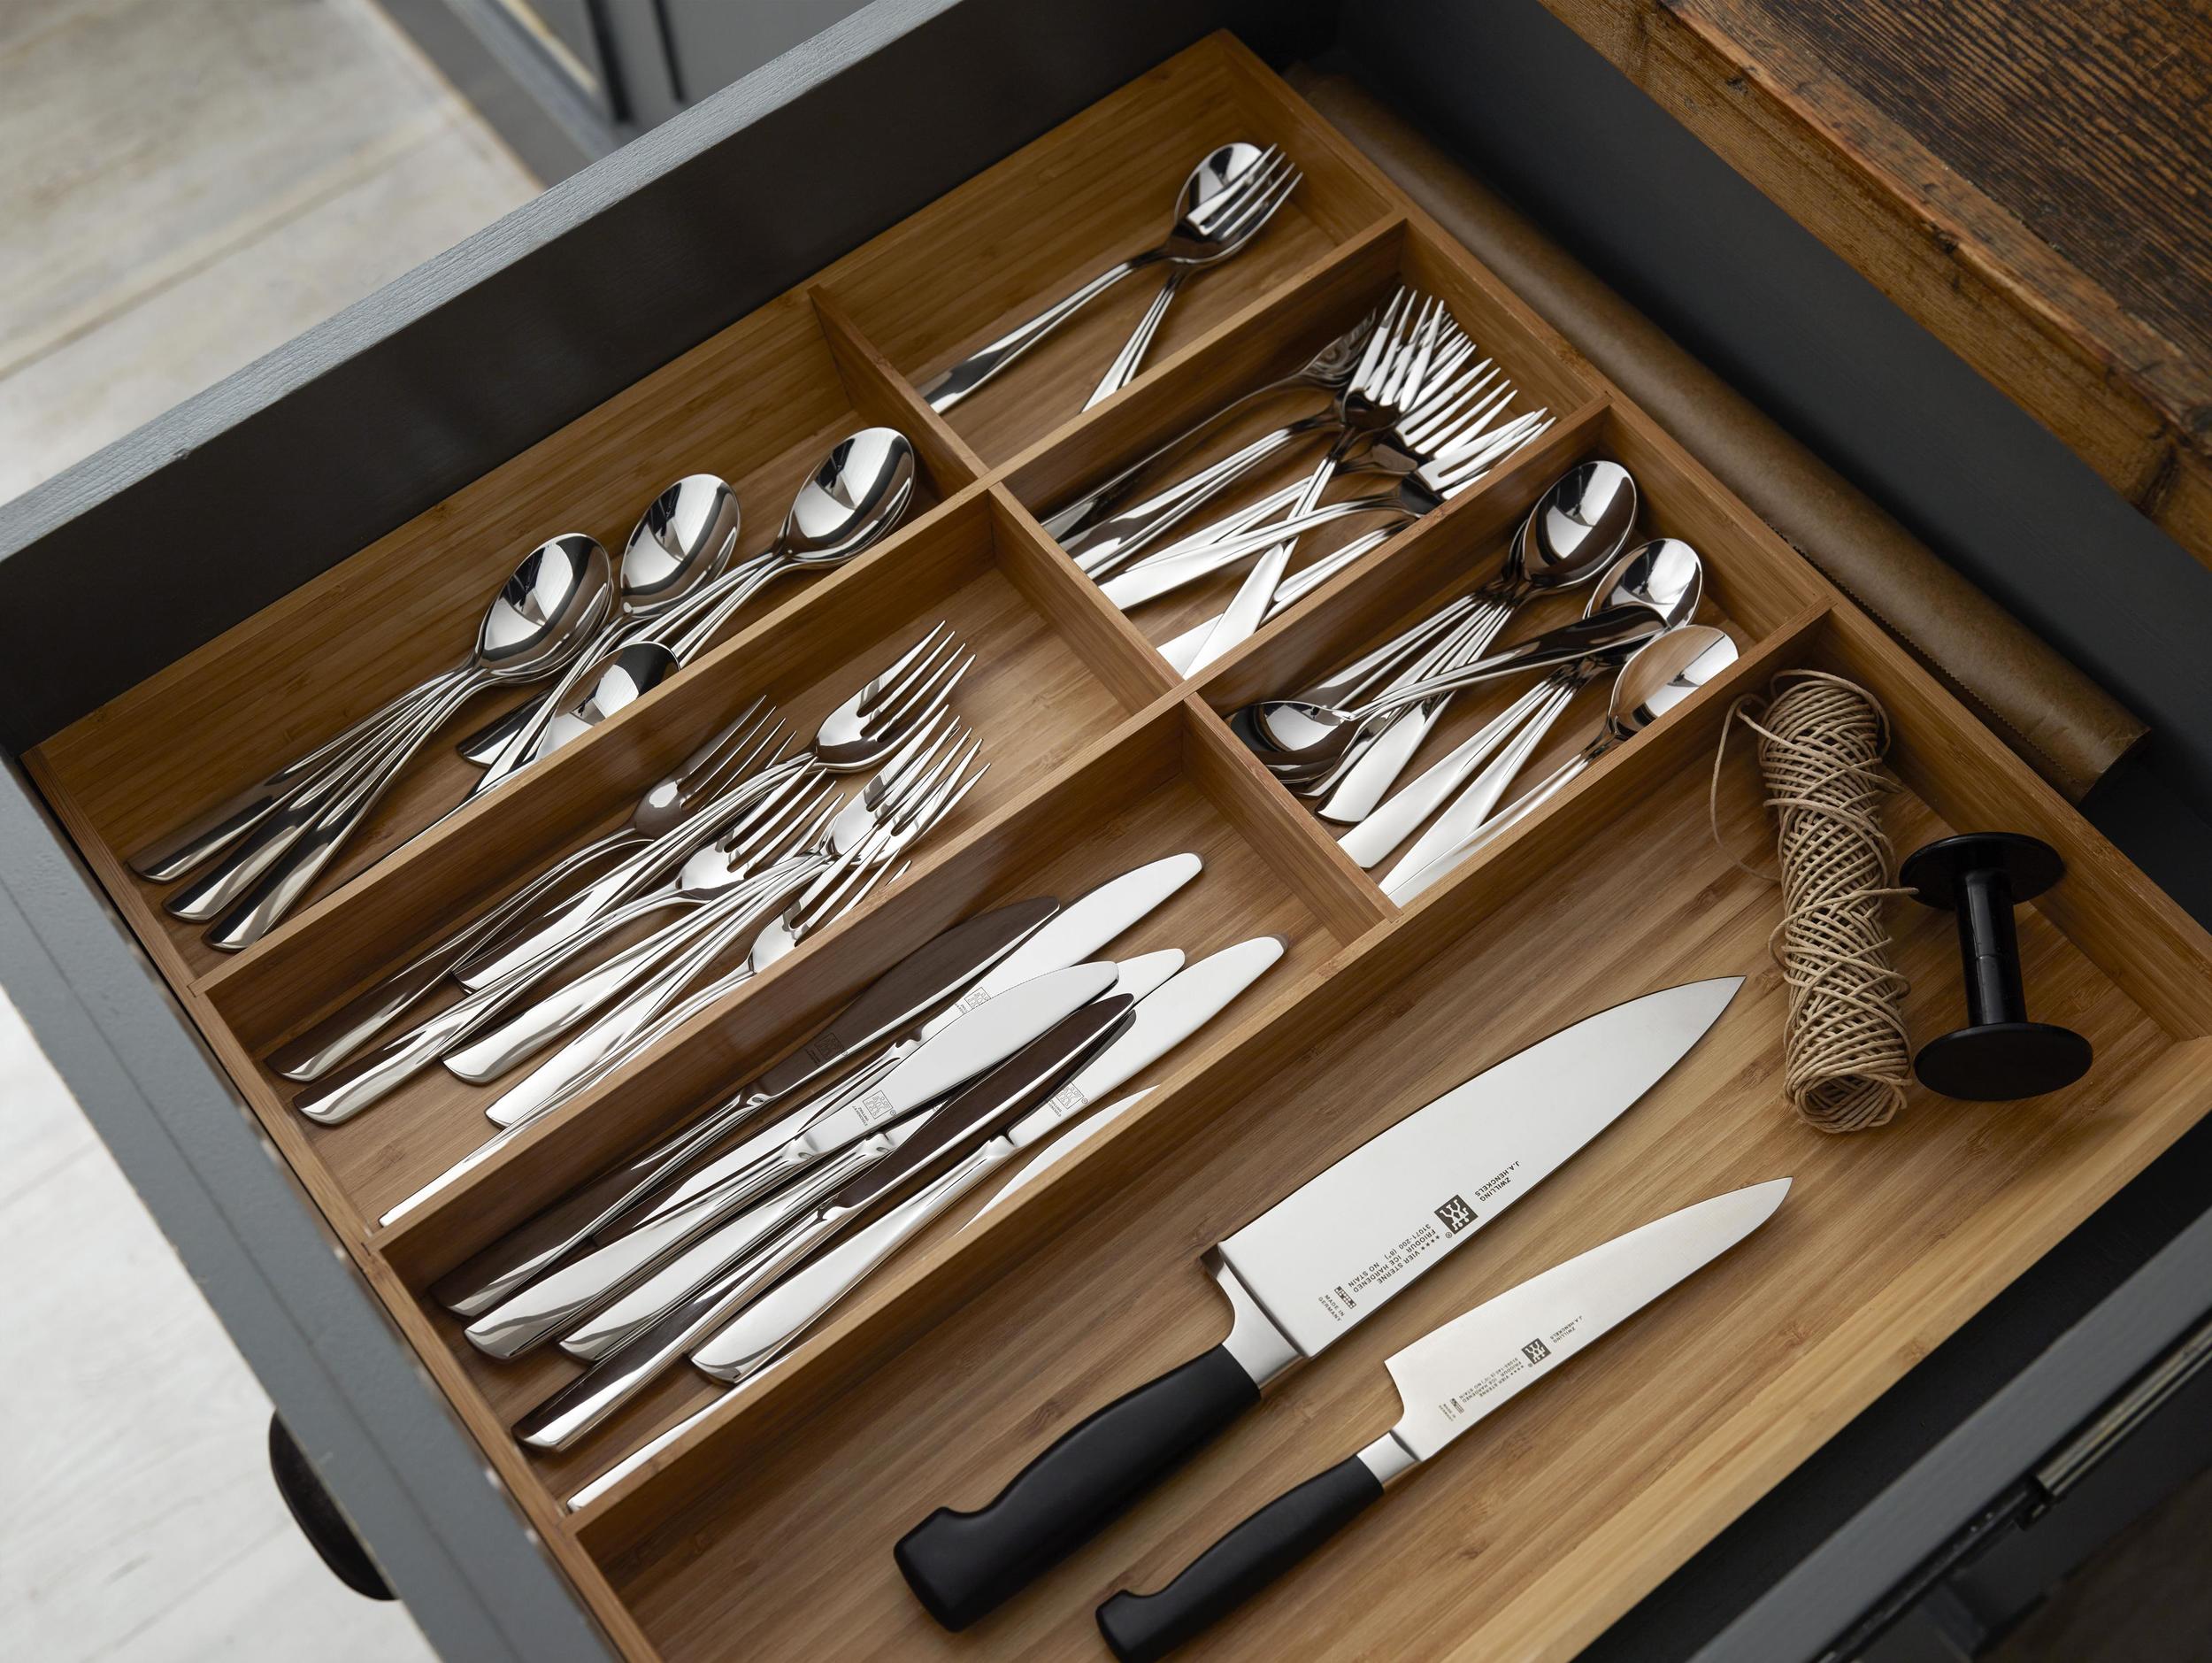 https://3fa-media.com/zwilling/zwilling-four-star-chef-s-knife-14-cm-compact__129539_25498a6-s2500x2500.jpg